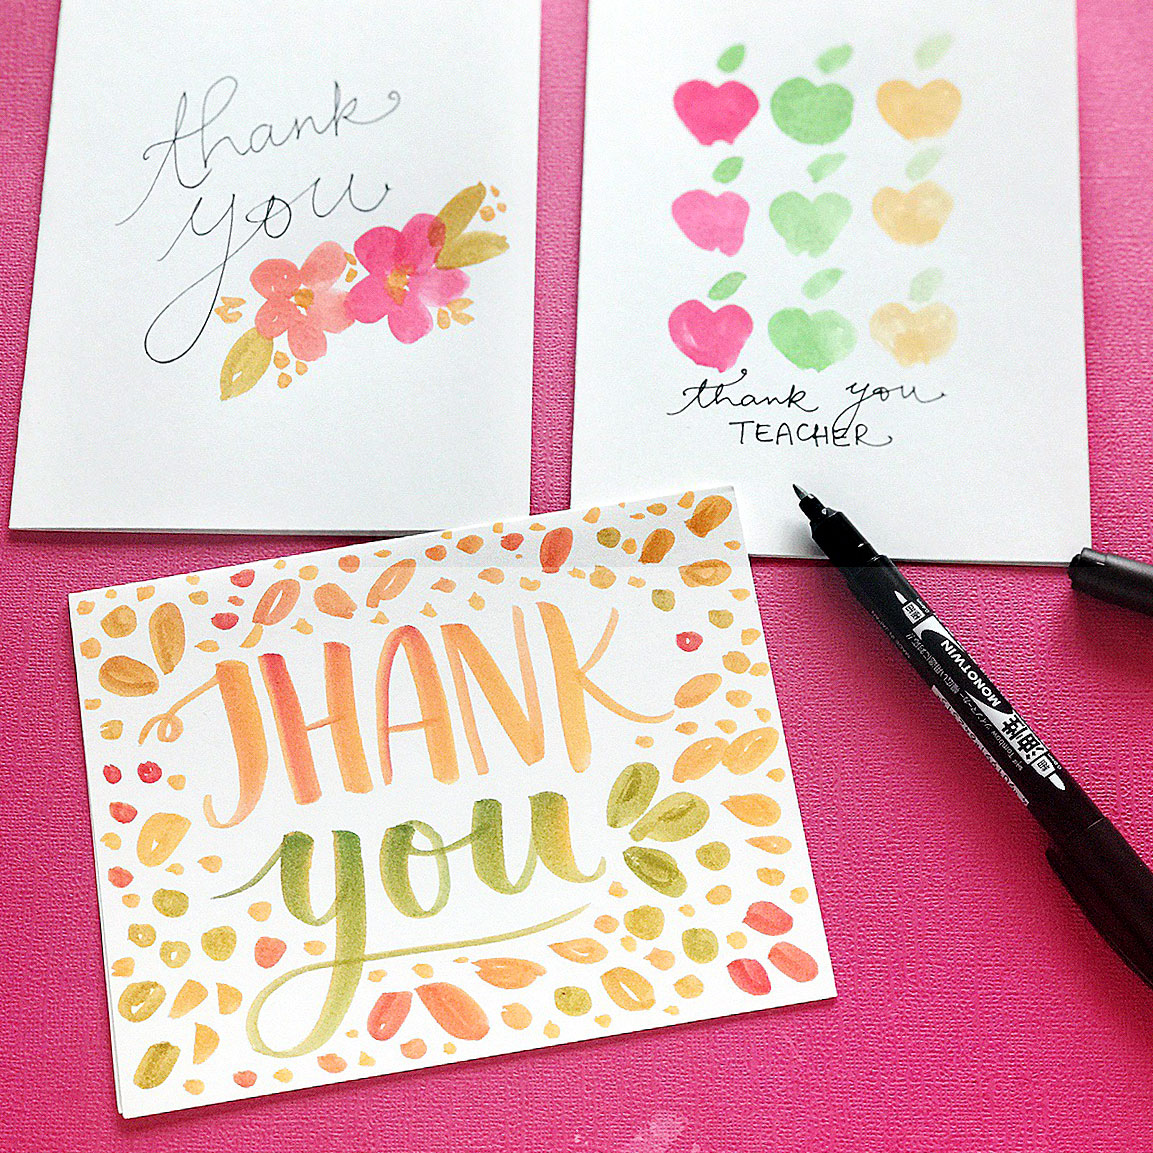 20-awesome-teachers-day-gift-ideas-with-thank-you-cards-k4-craft